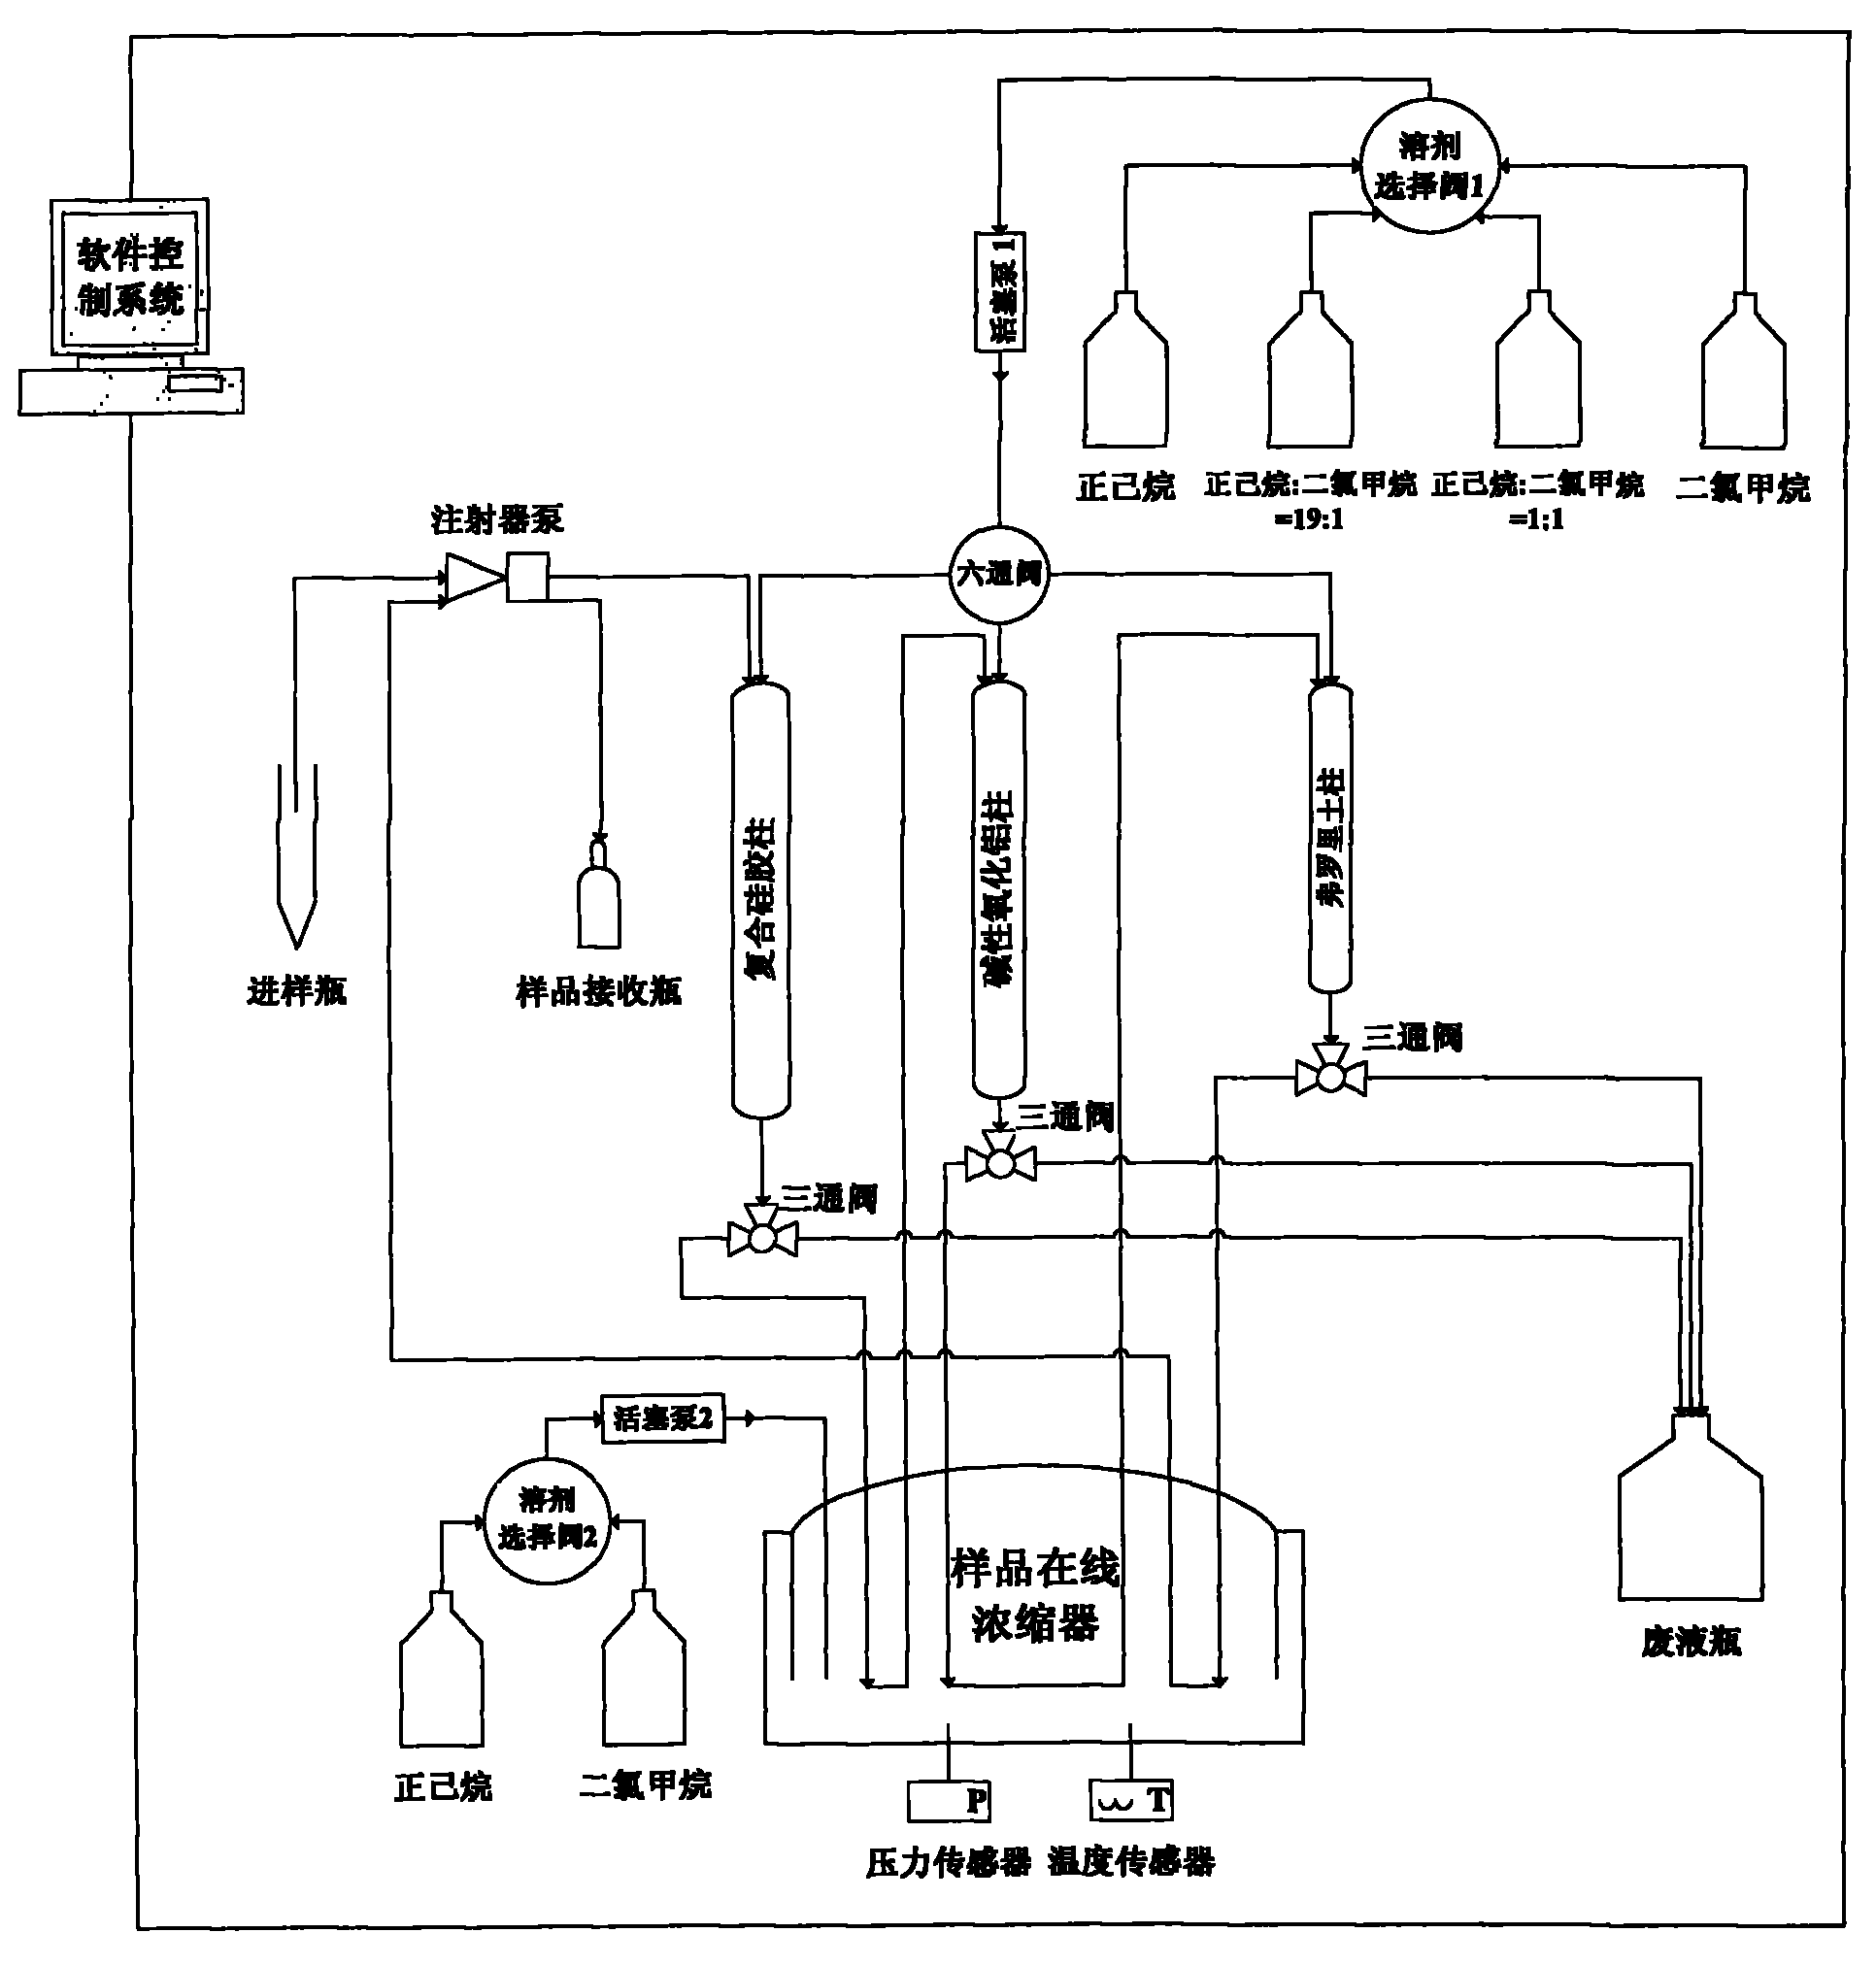 Pretreatment method for purifying extract liquor